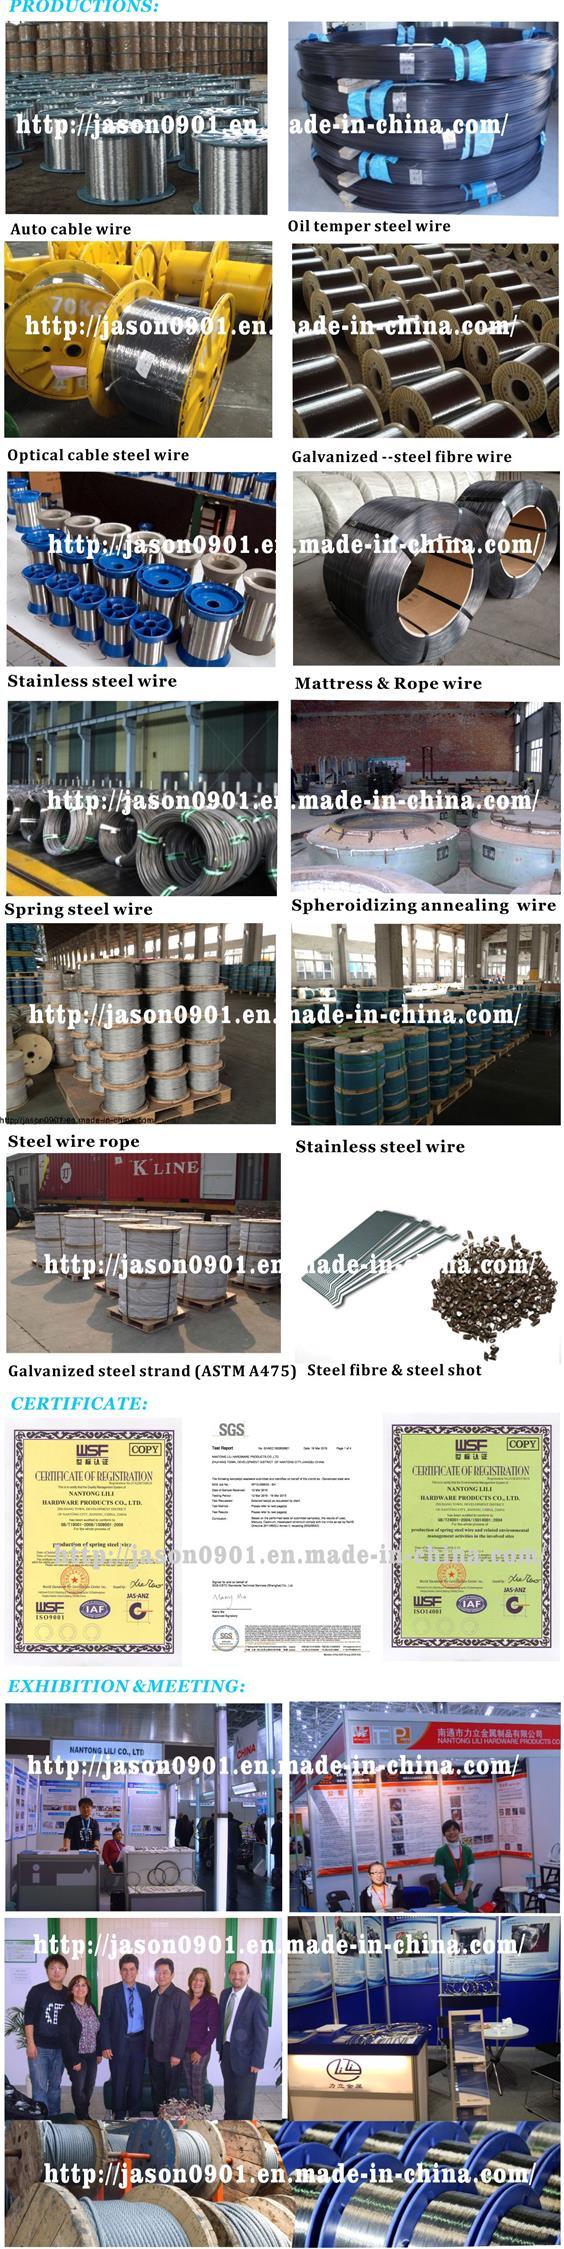 Steel Wire, Steel Wire Rope, Stainless Steel Wire, Steel Wire B60packing